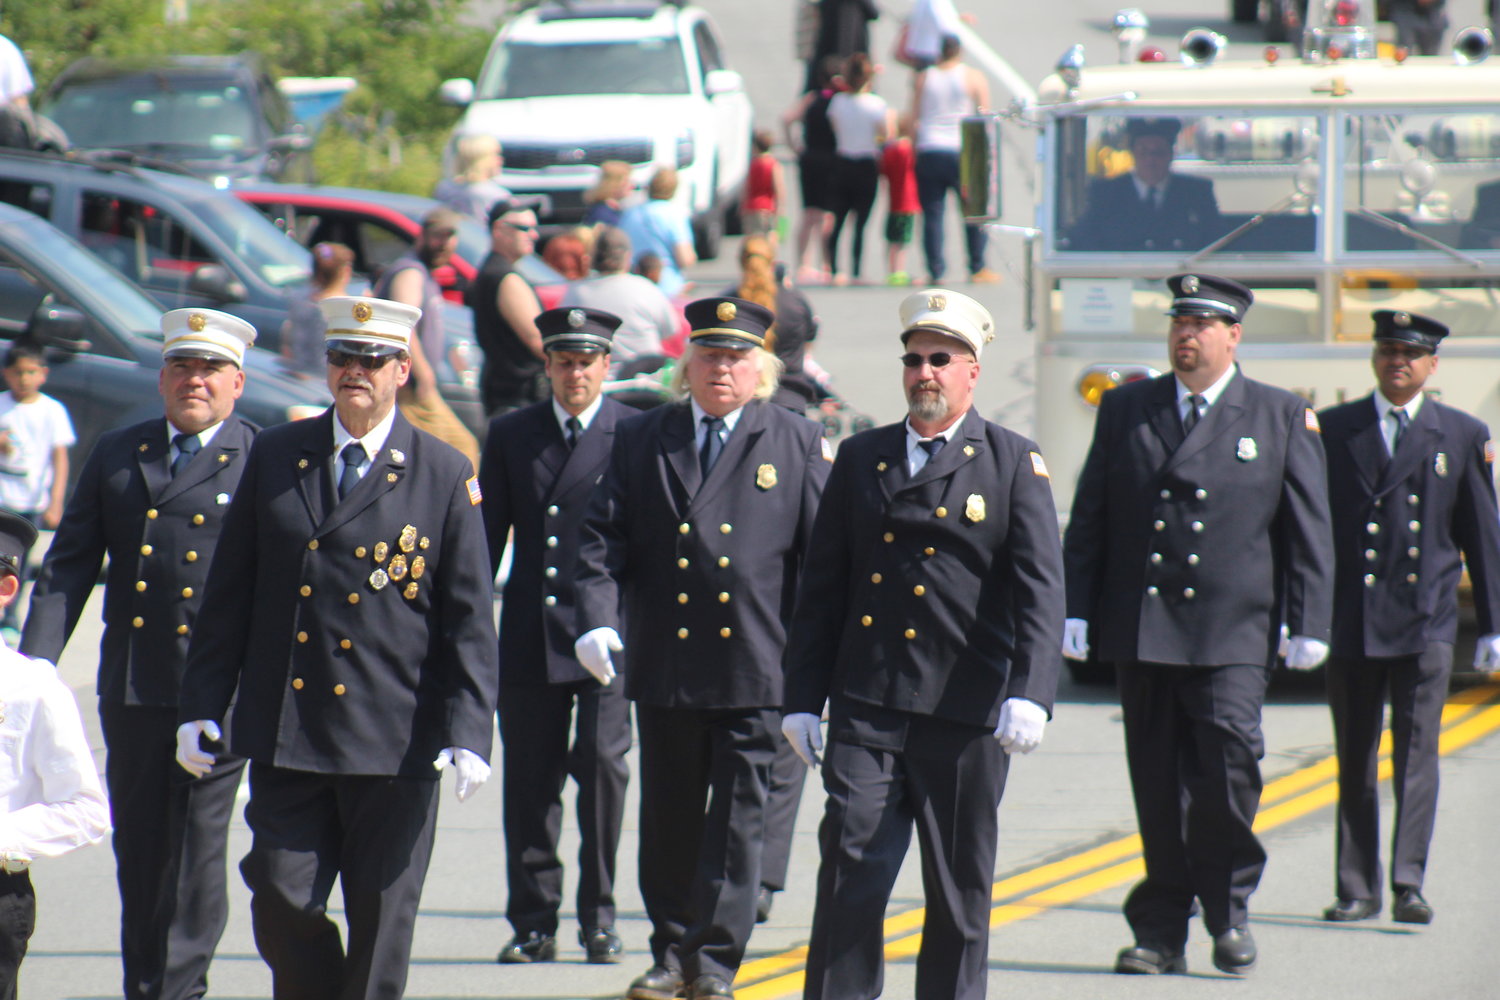 Members of the Swan Lake Fire Department marched with pride